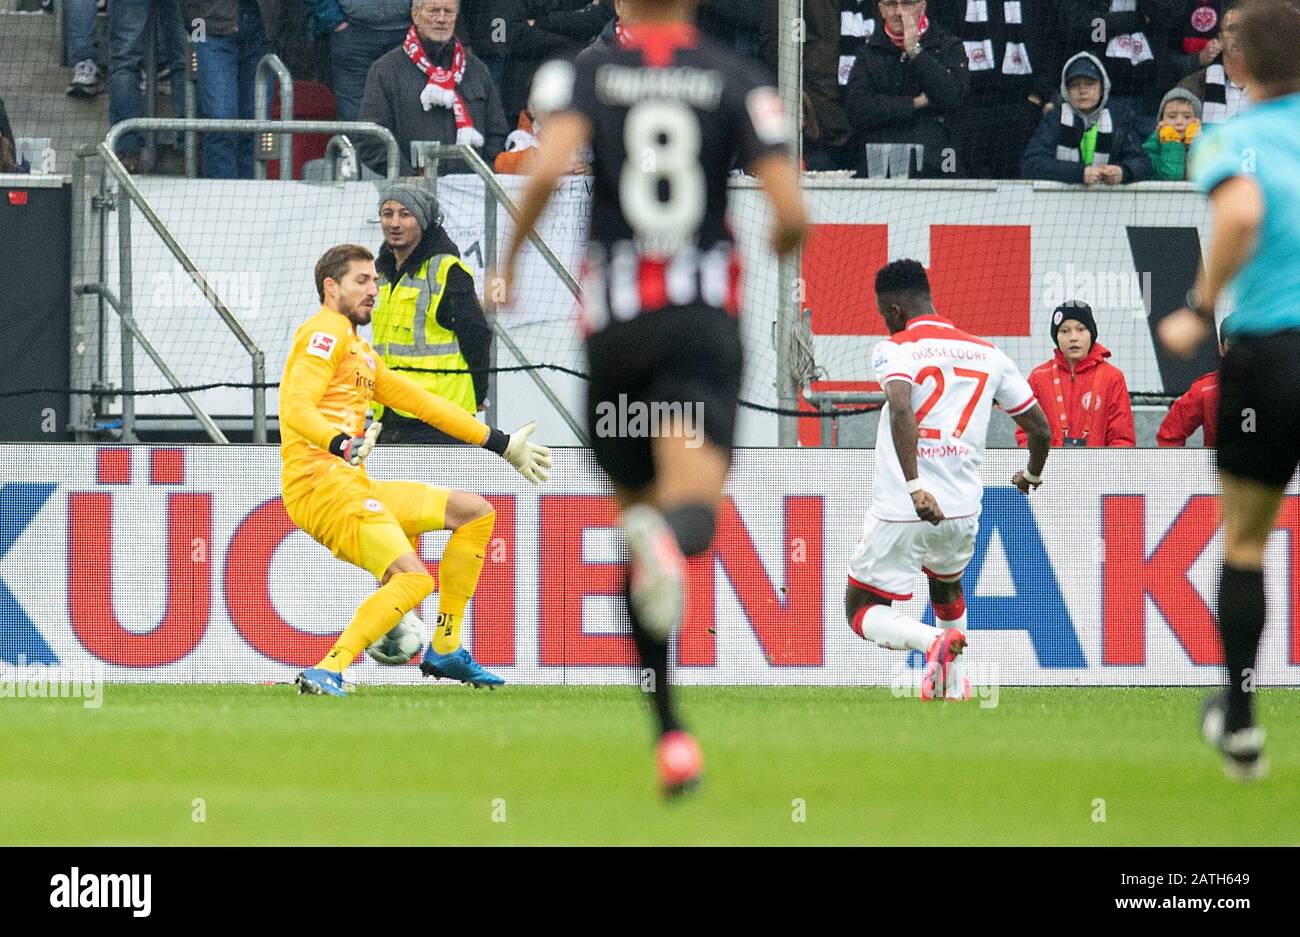 Opoku 'Nana' AMPOMAH r. (D) scores a goal versus goalwart goalwart Kevin TRAPP (F), which is withdrawn by video evidence, action, football 1. Bundesliga, 20th matchday, Fortuna Dusseldorf (D) - Eintracht Frankfurt (F) 1: 1, on 01.02. 2020 in Duesseldorf/Germany. ¬ | usage worldwide Stock Photo